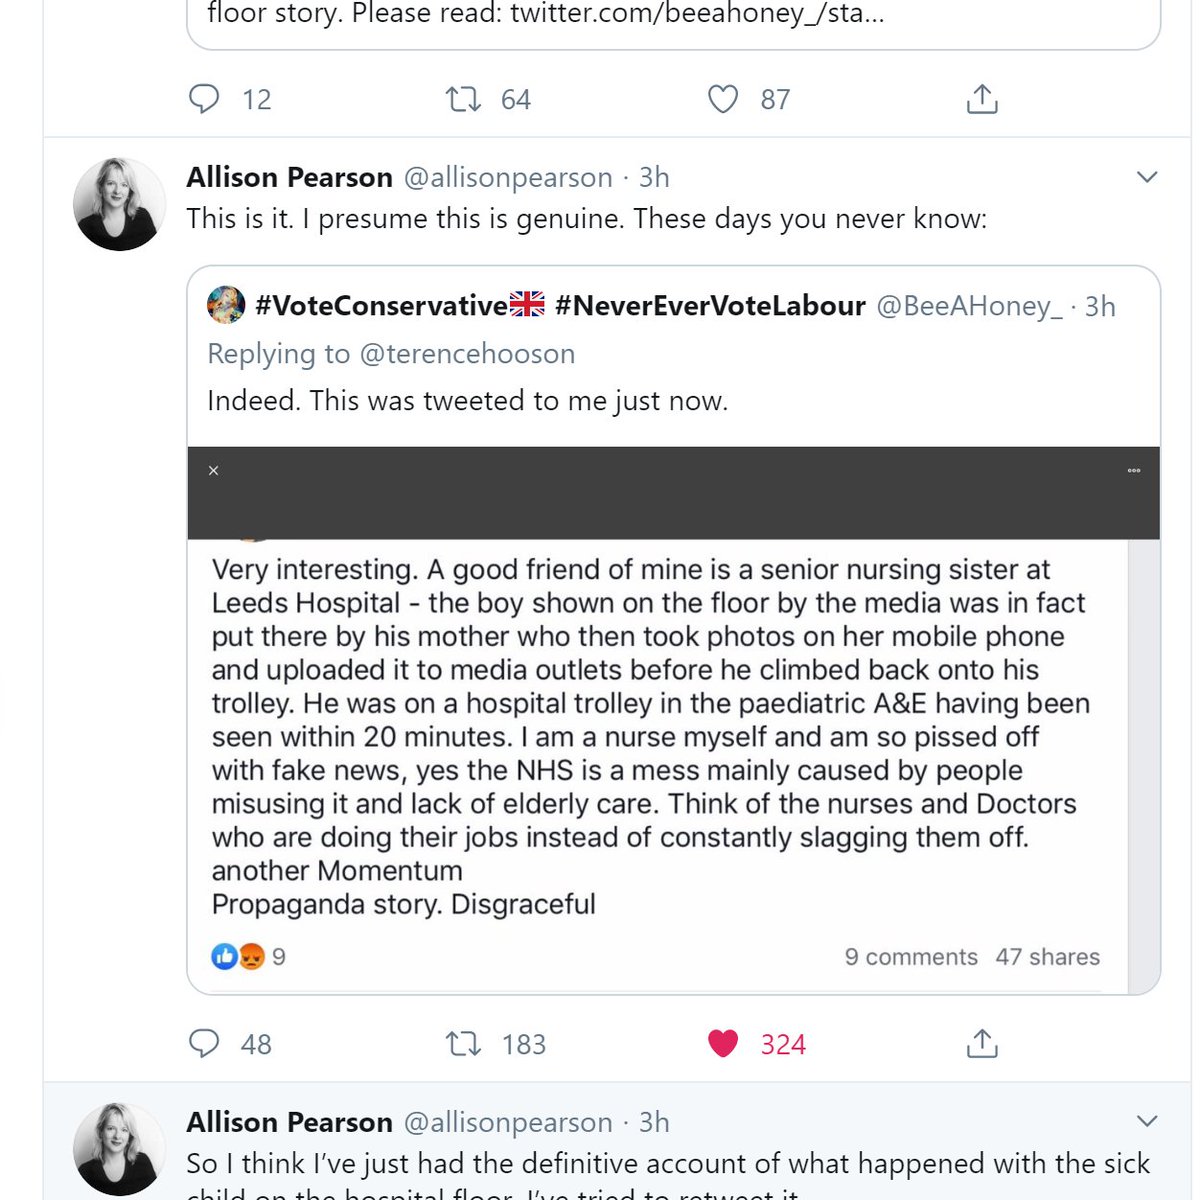 7/ Meanwhile, back on Twitter,  @Telegraph columnist  @allisonpearson retweeted the copy and pasted tweet (of course in theory the text could still be genuine - but if so why is is circulated by weird sock puppets). Pearson 'presumes it is genuine'.